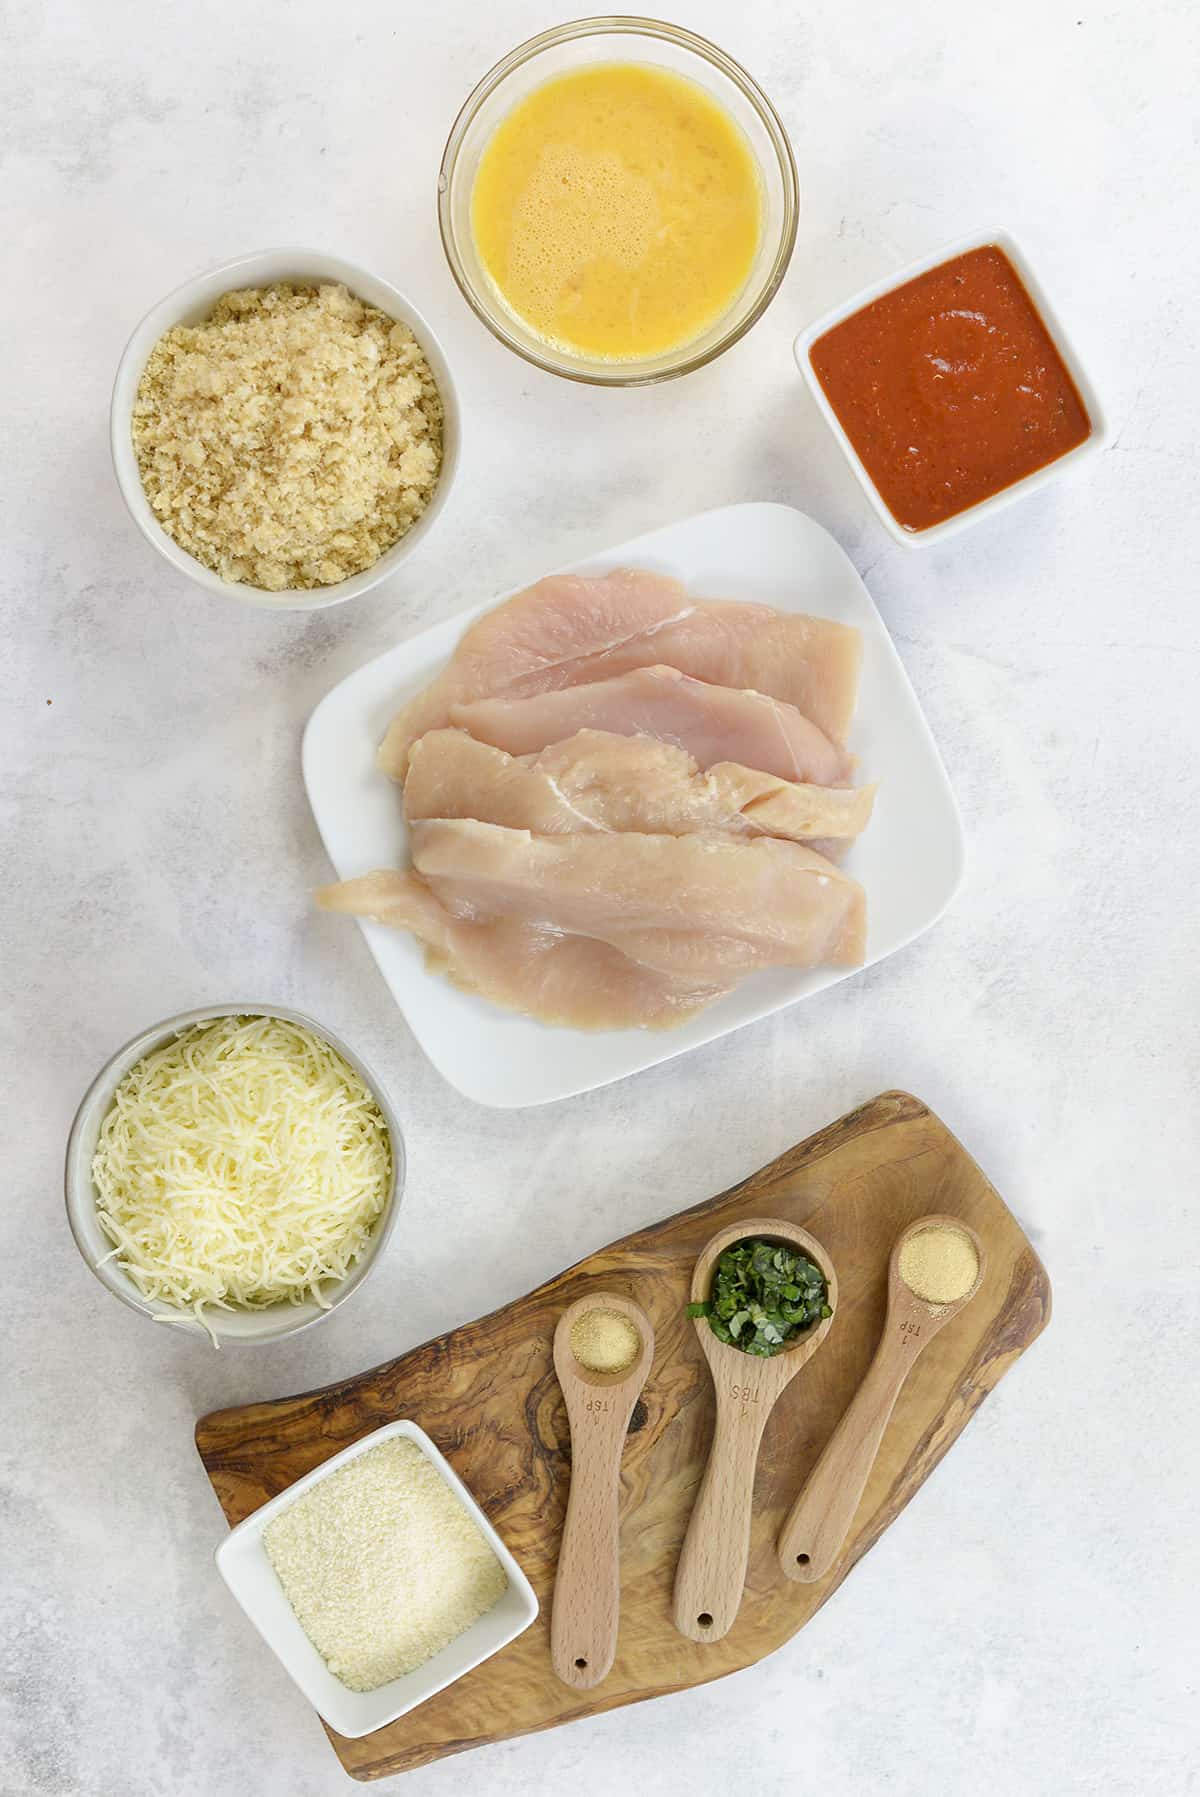 Ingredients for keto chicken parmesan made with pork rinds.